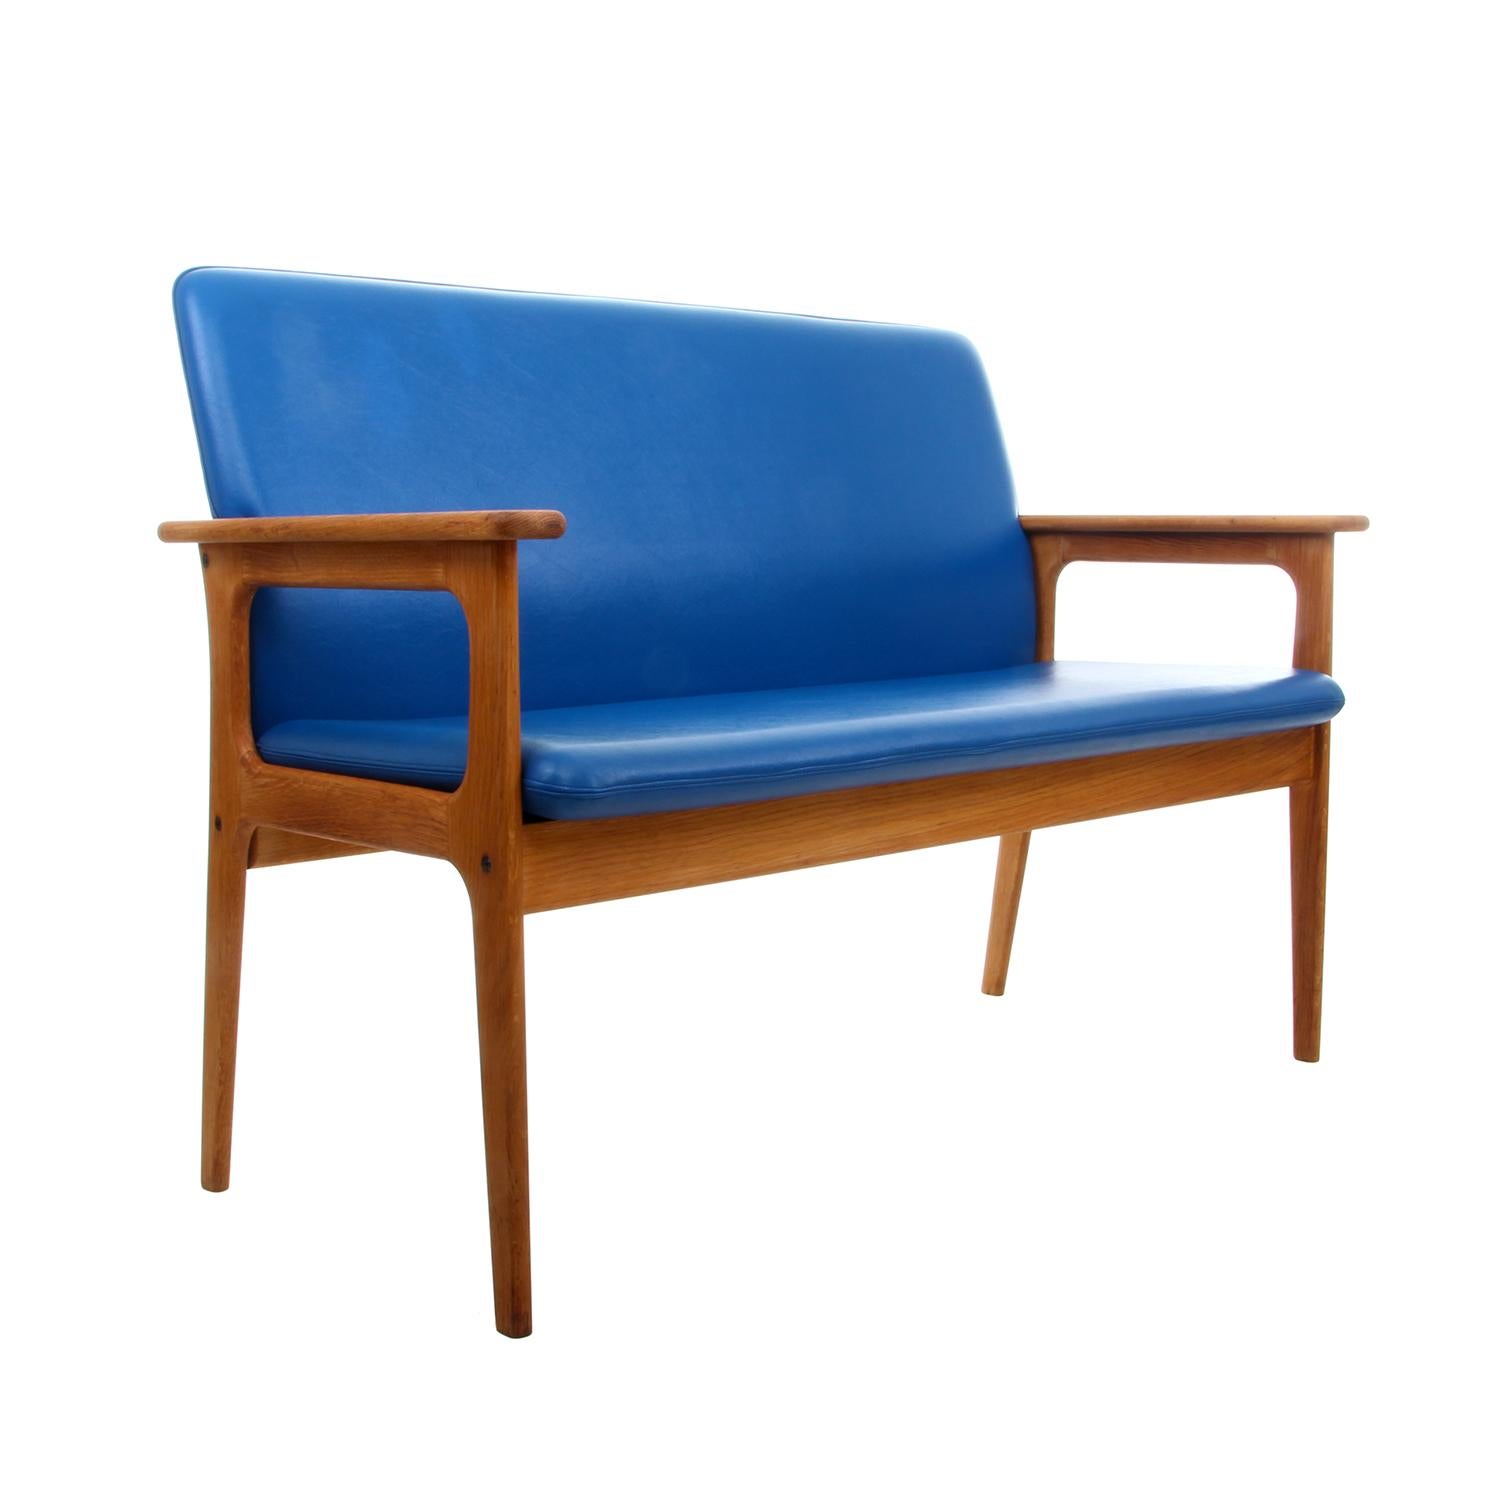 Two-Seat Sofa by Erik Buch 1970s Oil-Treated Oak Couch with Clear Blue Upholster